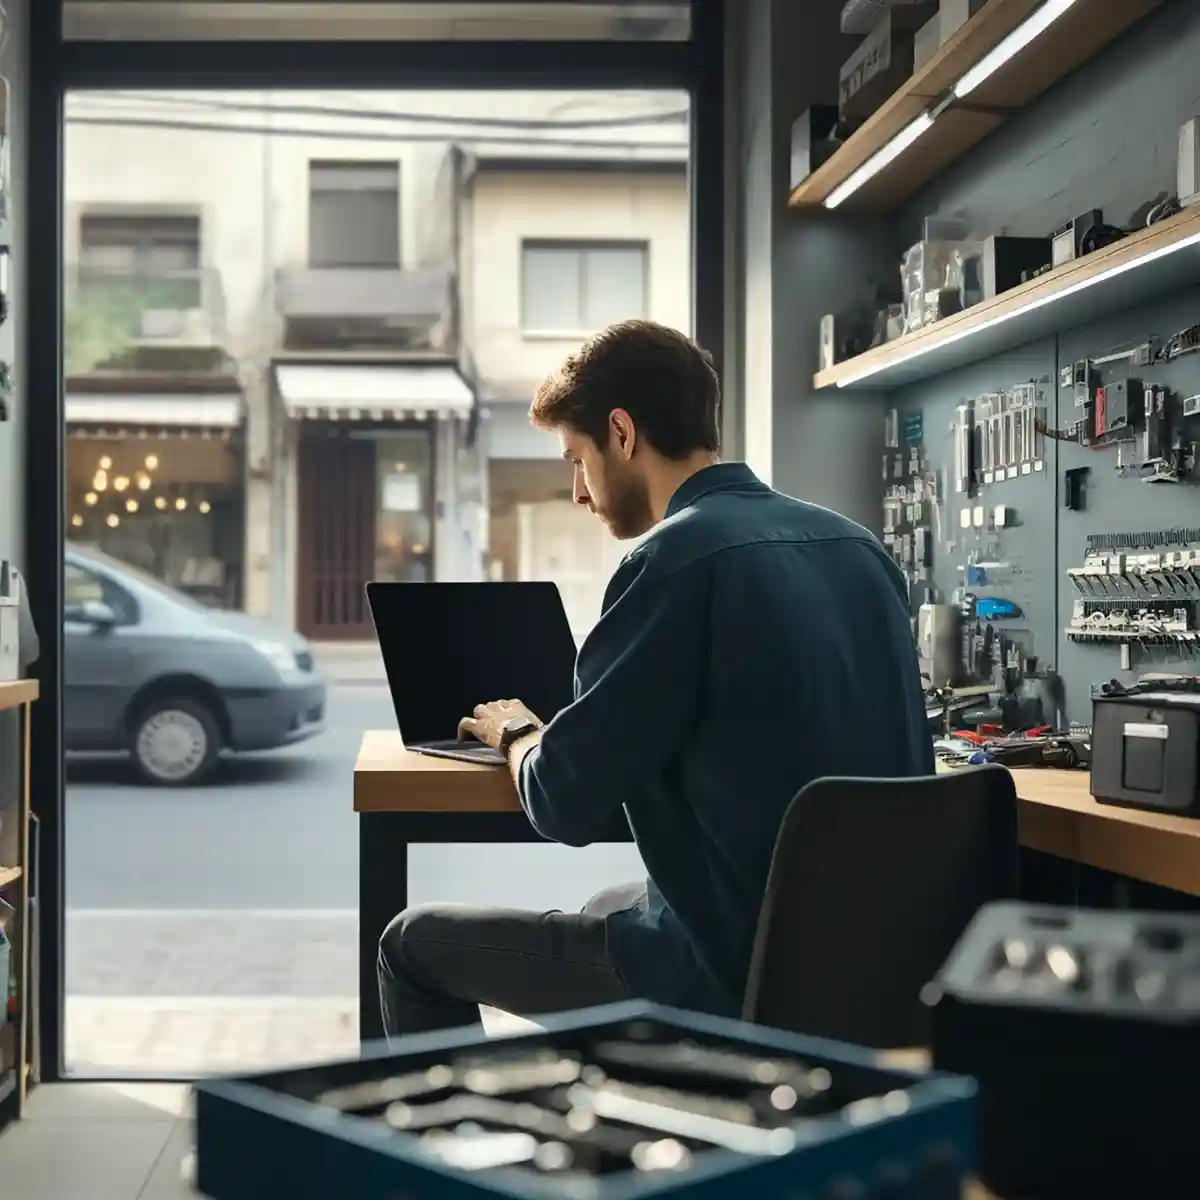 An IT technician works on a computer inside a small shop, surrounded by computer parts and gadgets. The shop features a visible front door and a window that looks out onto an urban street. The setting is modern and professional, depicting the technician focused on their task.